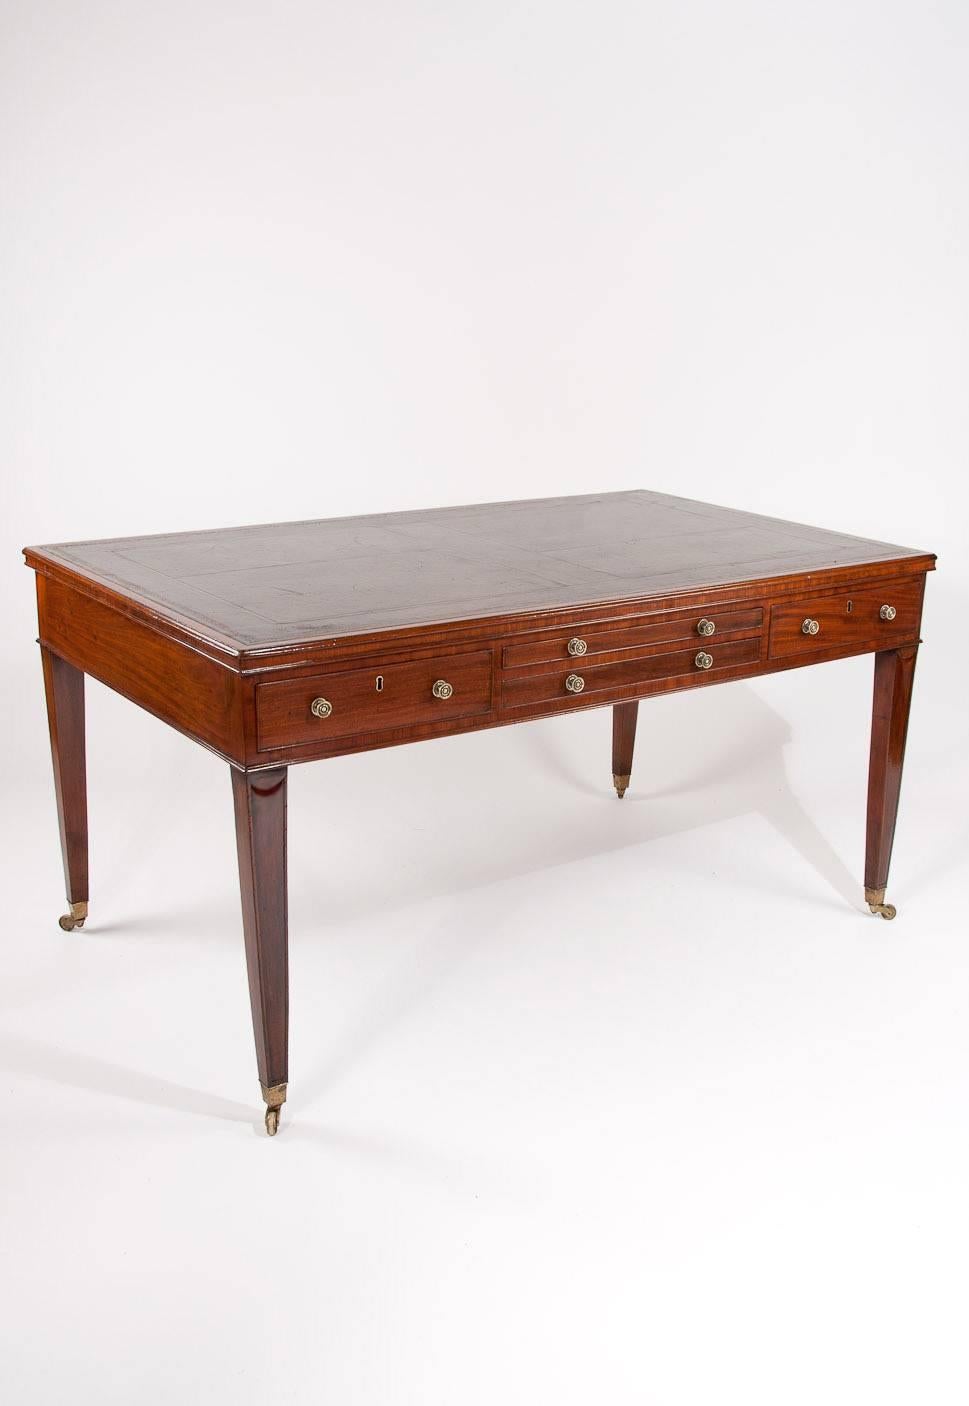 A very rare and fine quality mahogany Georgian partners writing table / desk with pull out adjustable reading / writing slide. This extremely rare writing table is made from the finest mahogany timbers with a rectangular leather inserted top with